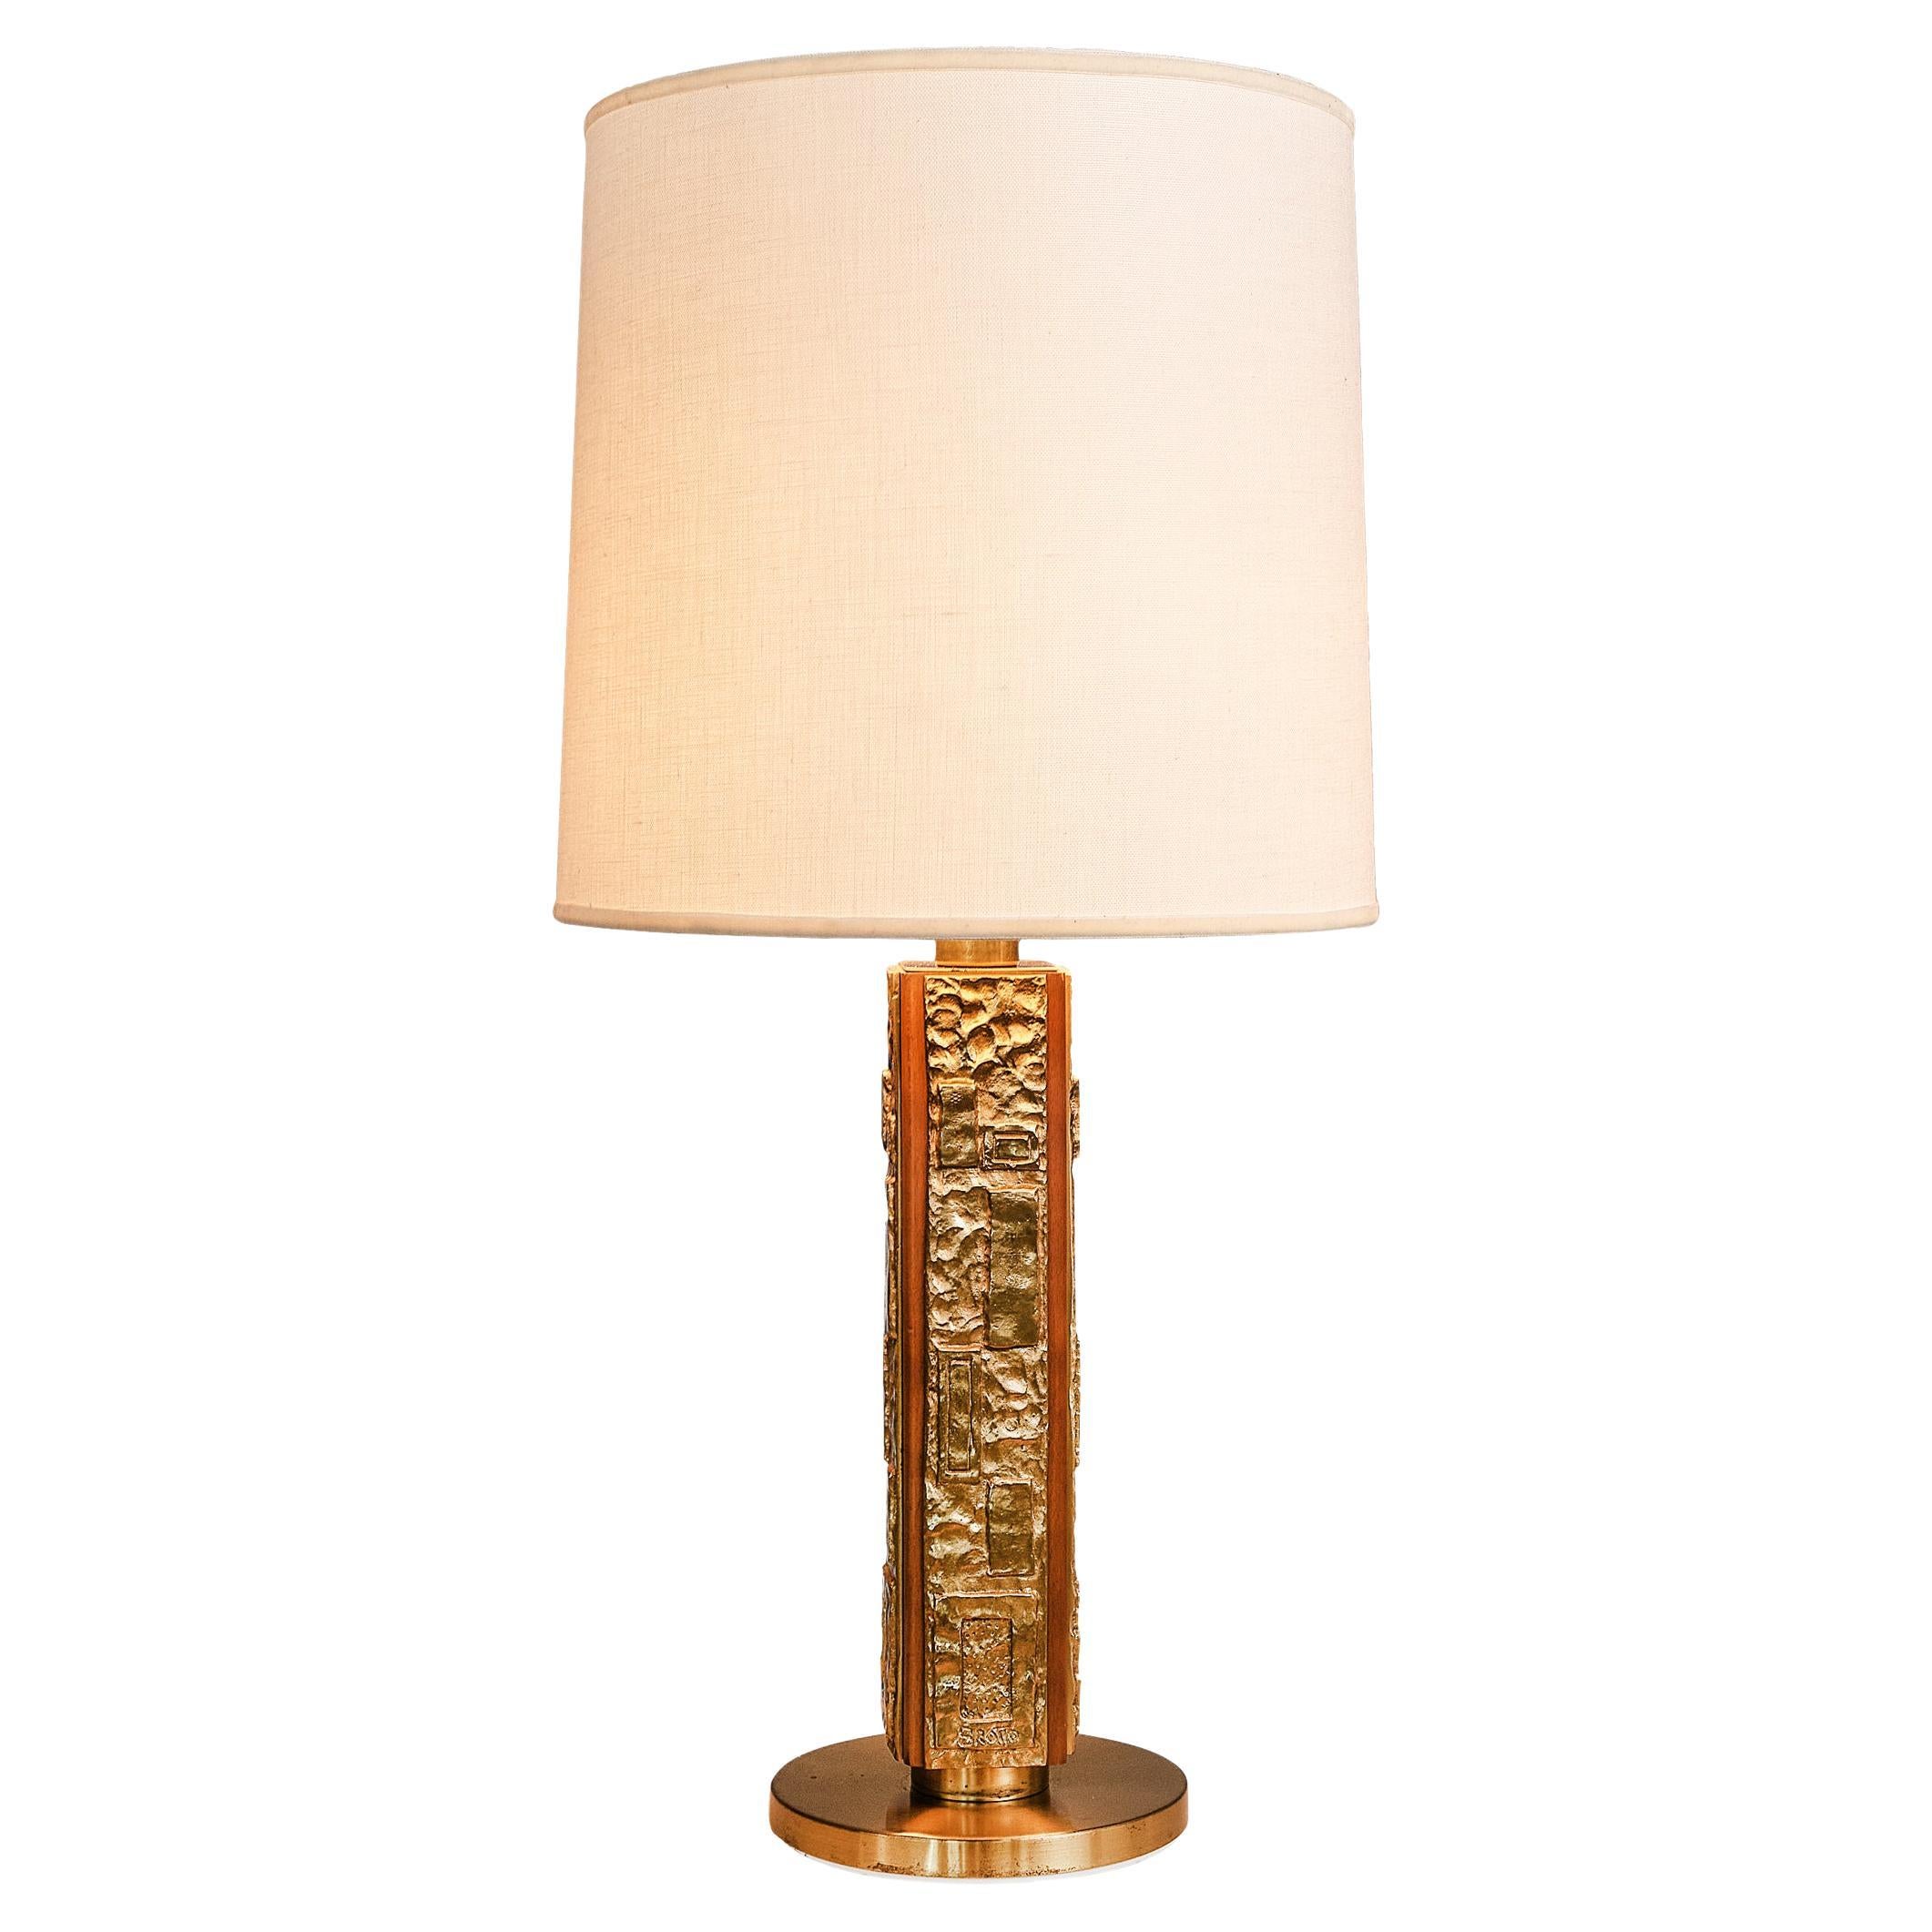 Angelo Brotto for Esperia ´Margot´ Table Lamp in Cast Bronze and Walnut